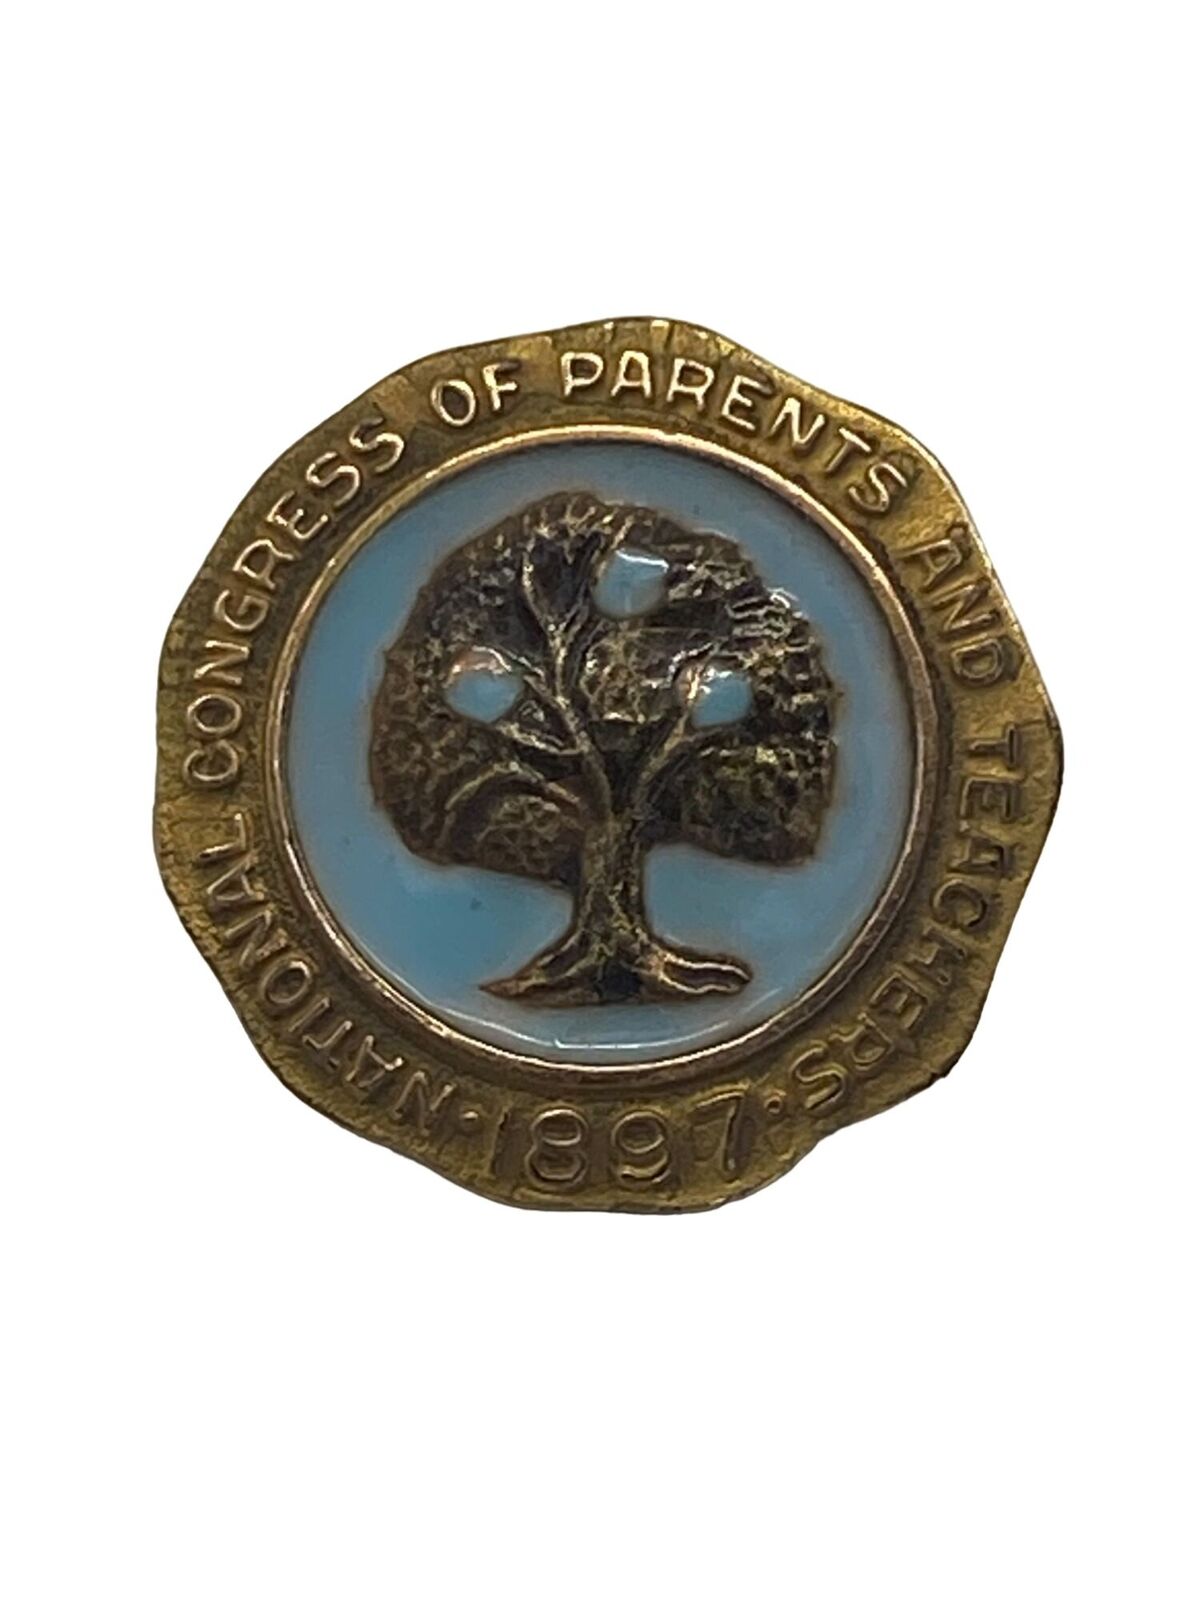 VTG 1897 National Congress of Parents and Teachers 1/20 10K Gold Filled Pin